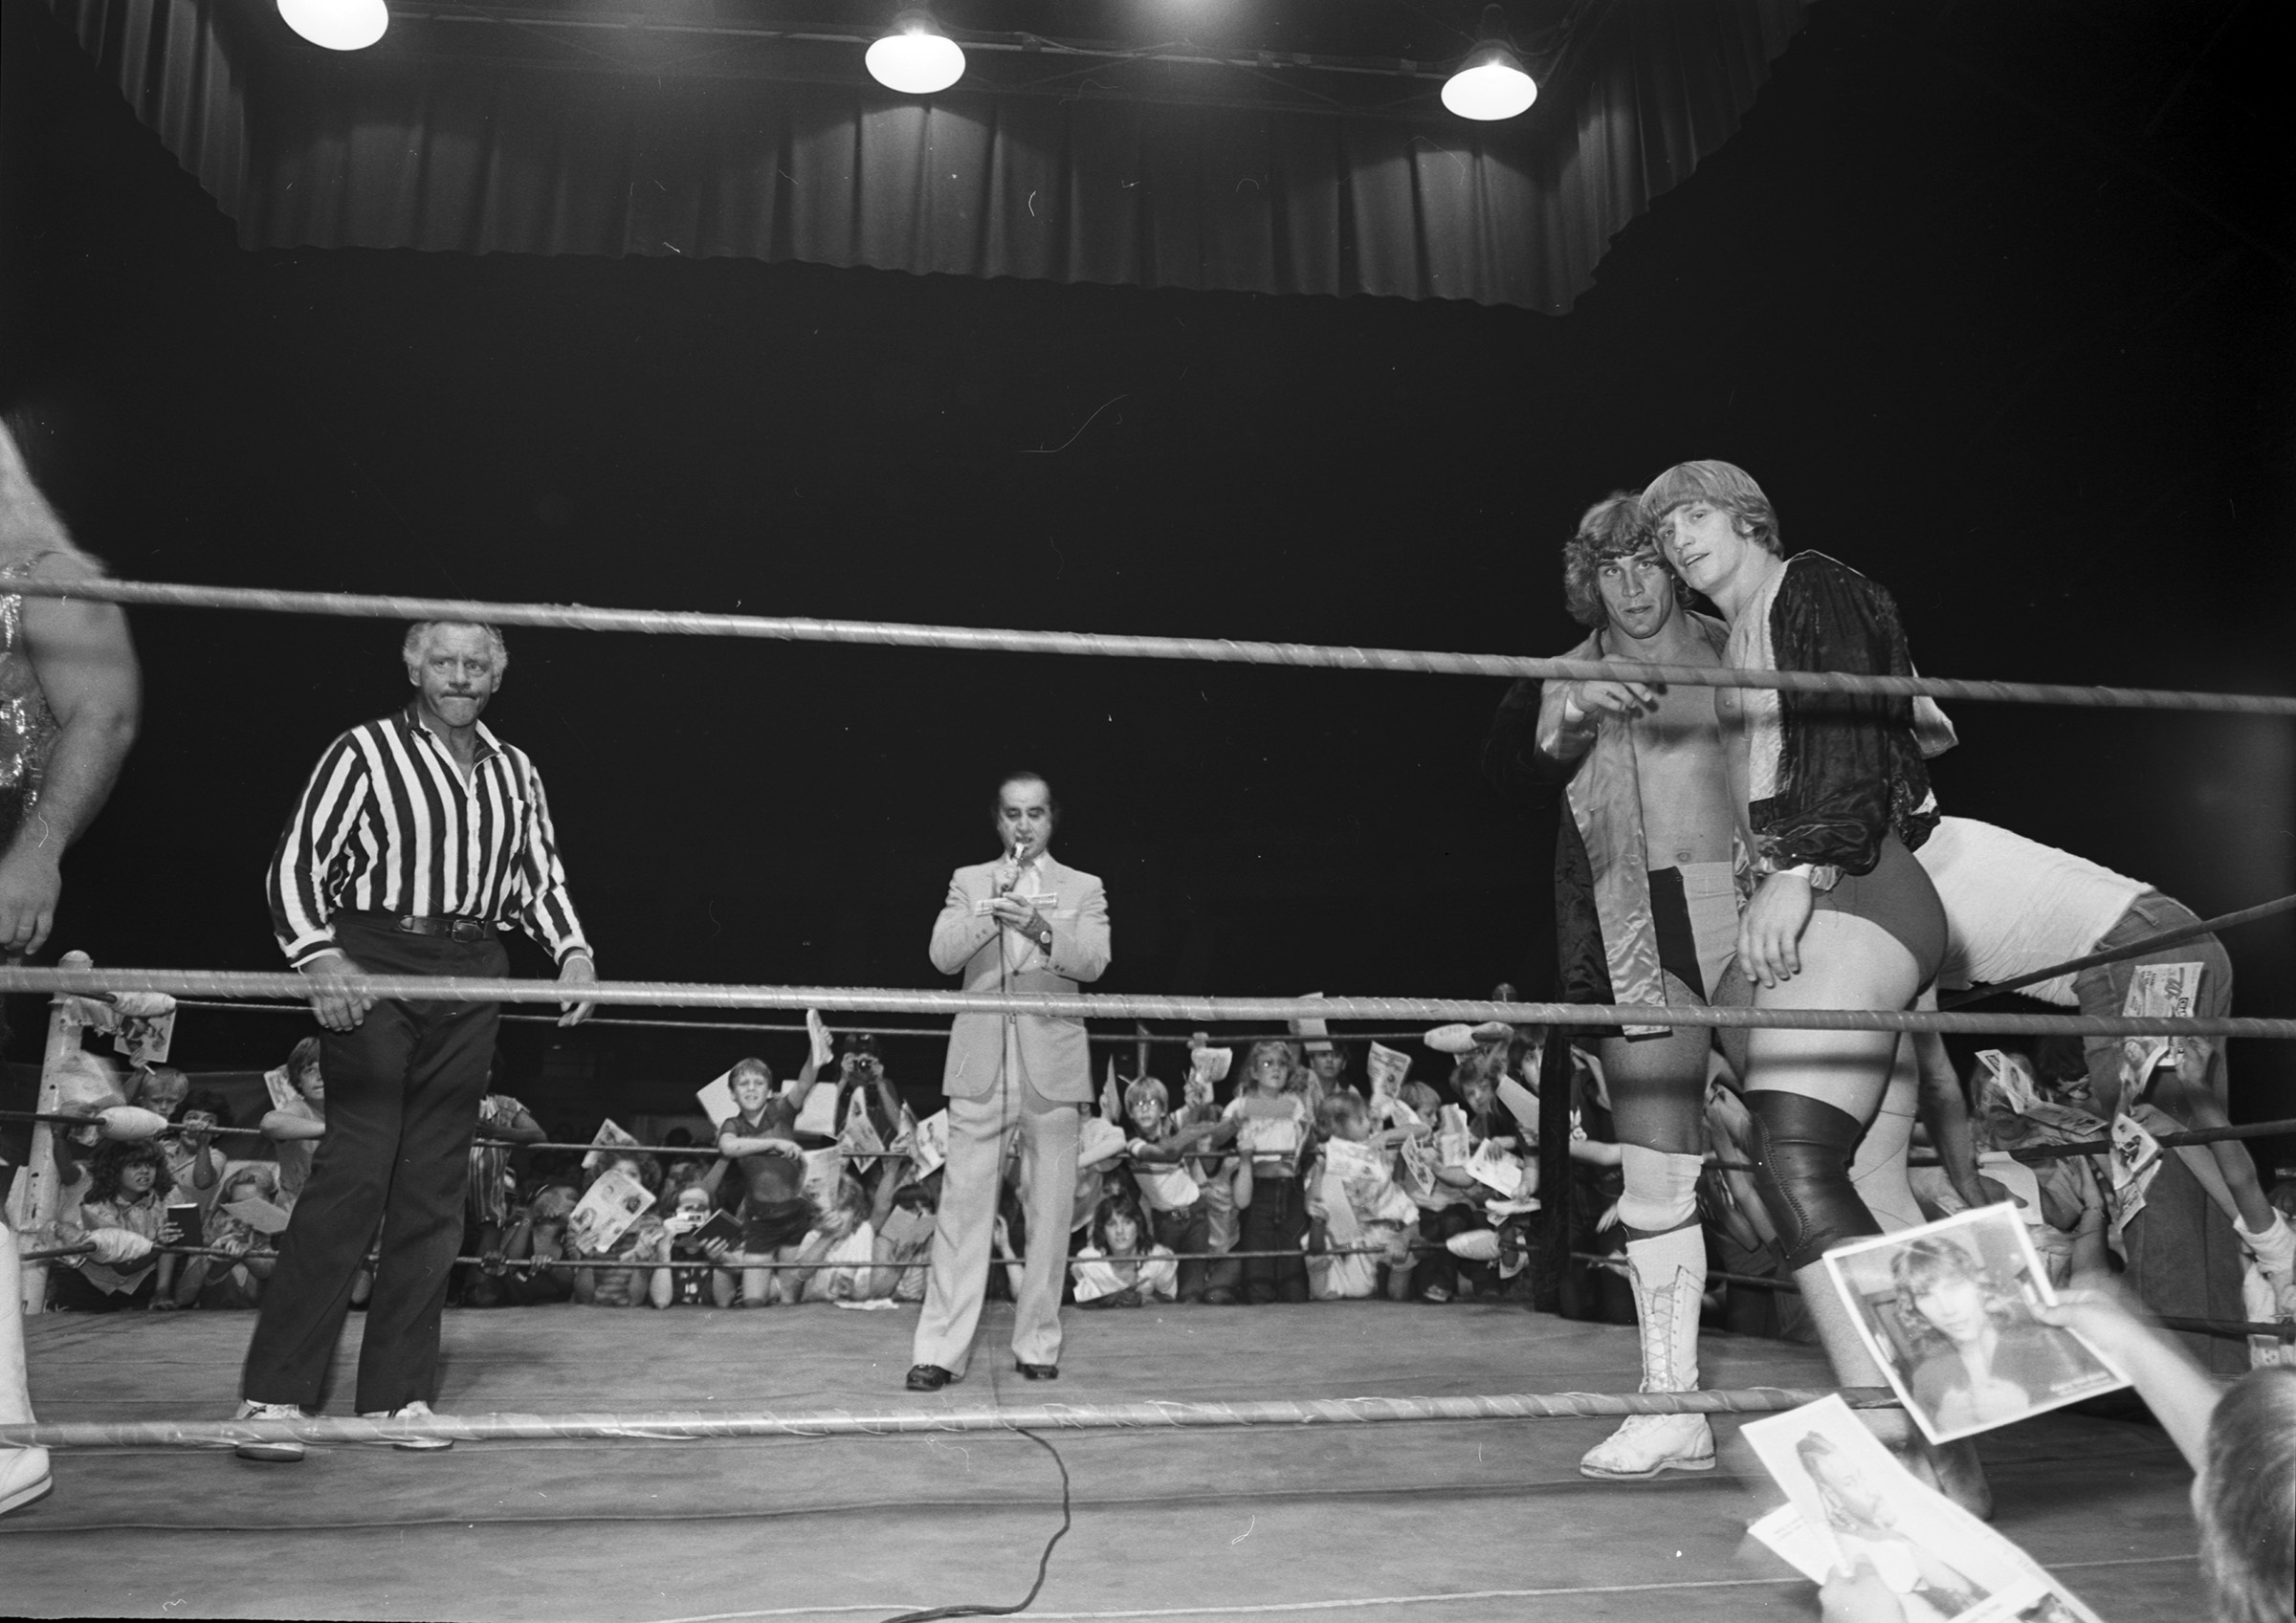 Wrestling at Will Rogers Coliseum, Fort Worth, Texas ca. 1981-82; Kerry Von Erich and Kevin Von Erich at far right, ring announcer Joe Rinelli, and unidentified referee